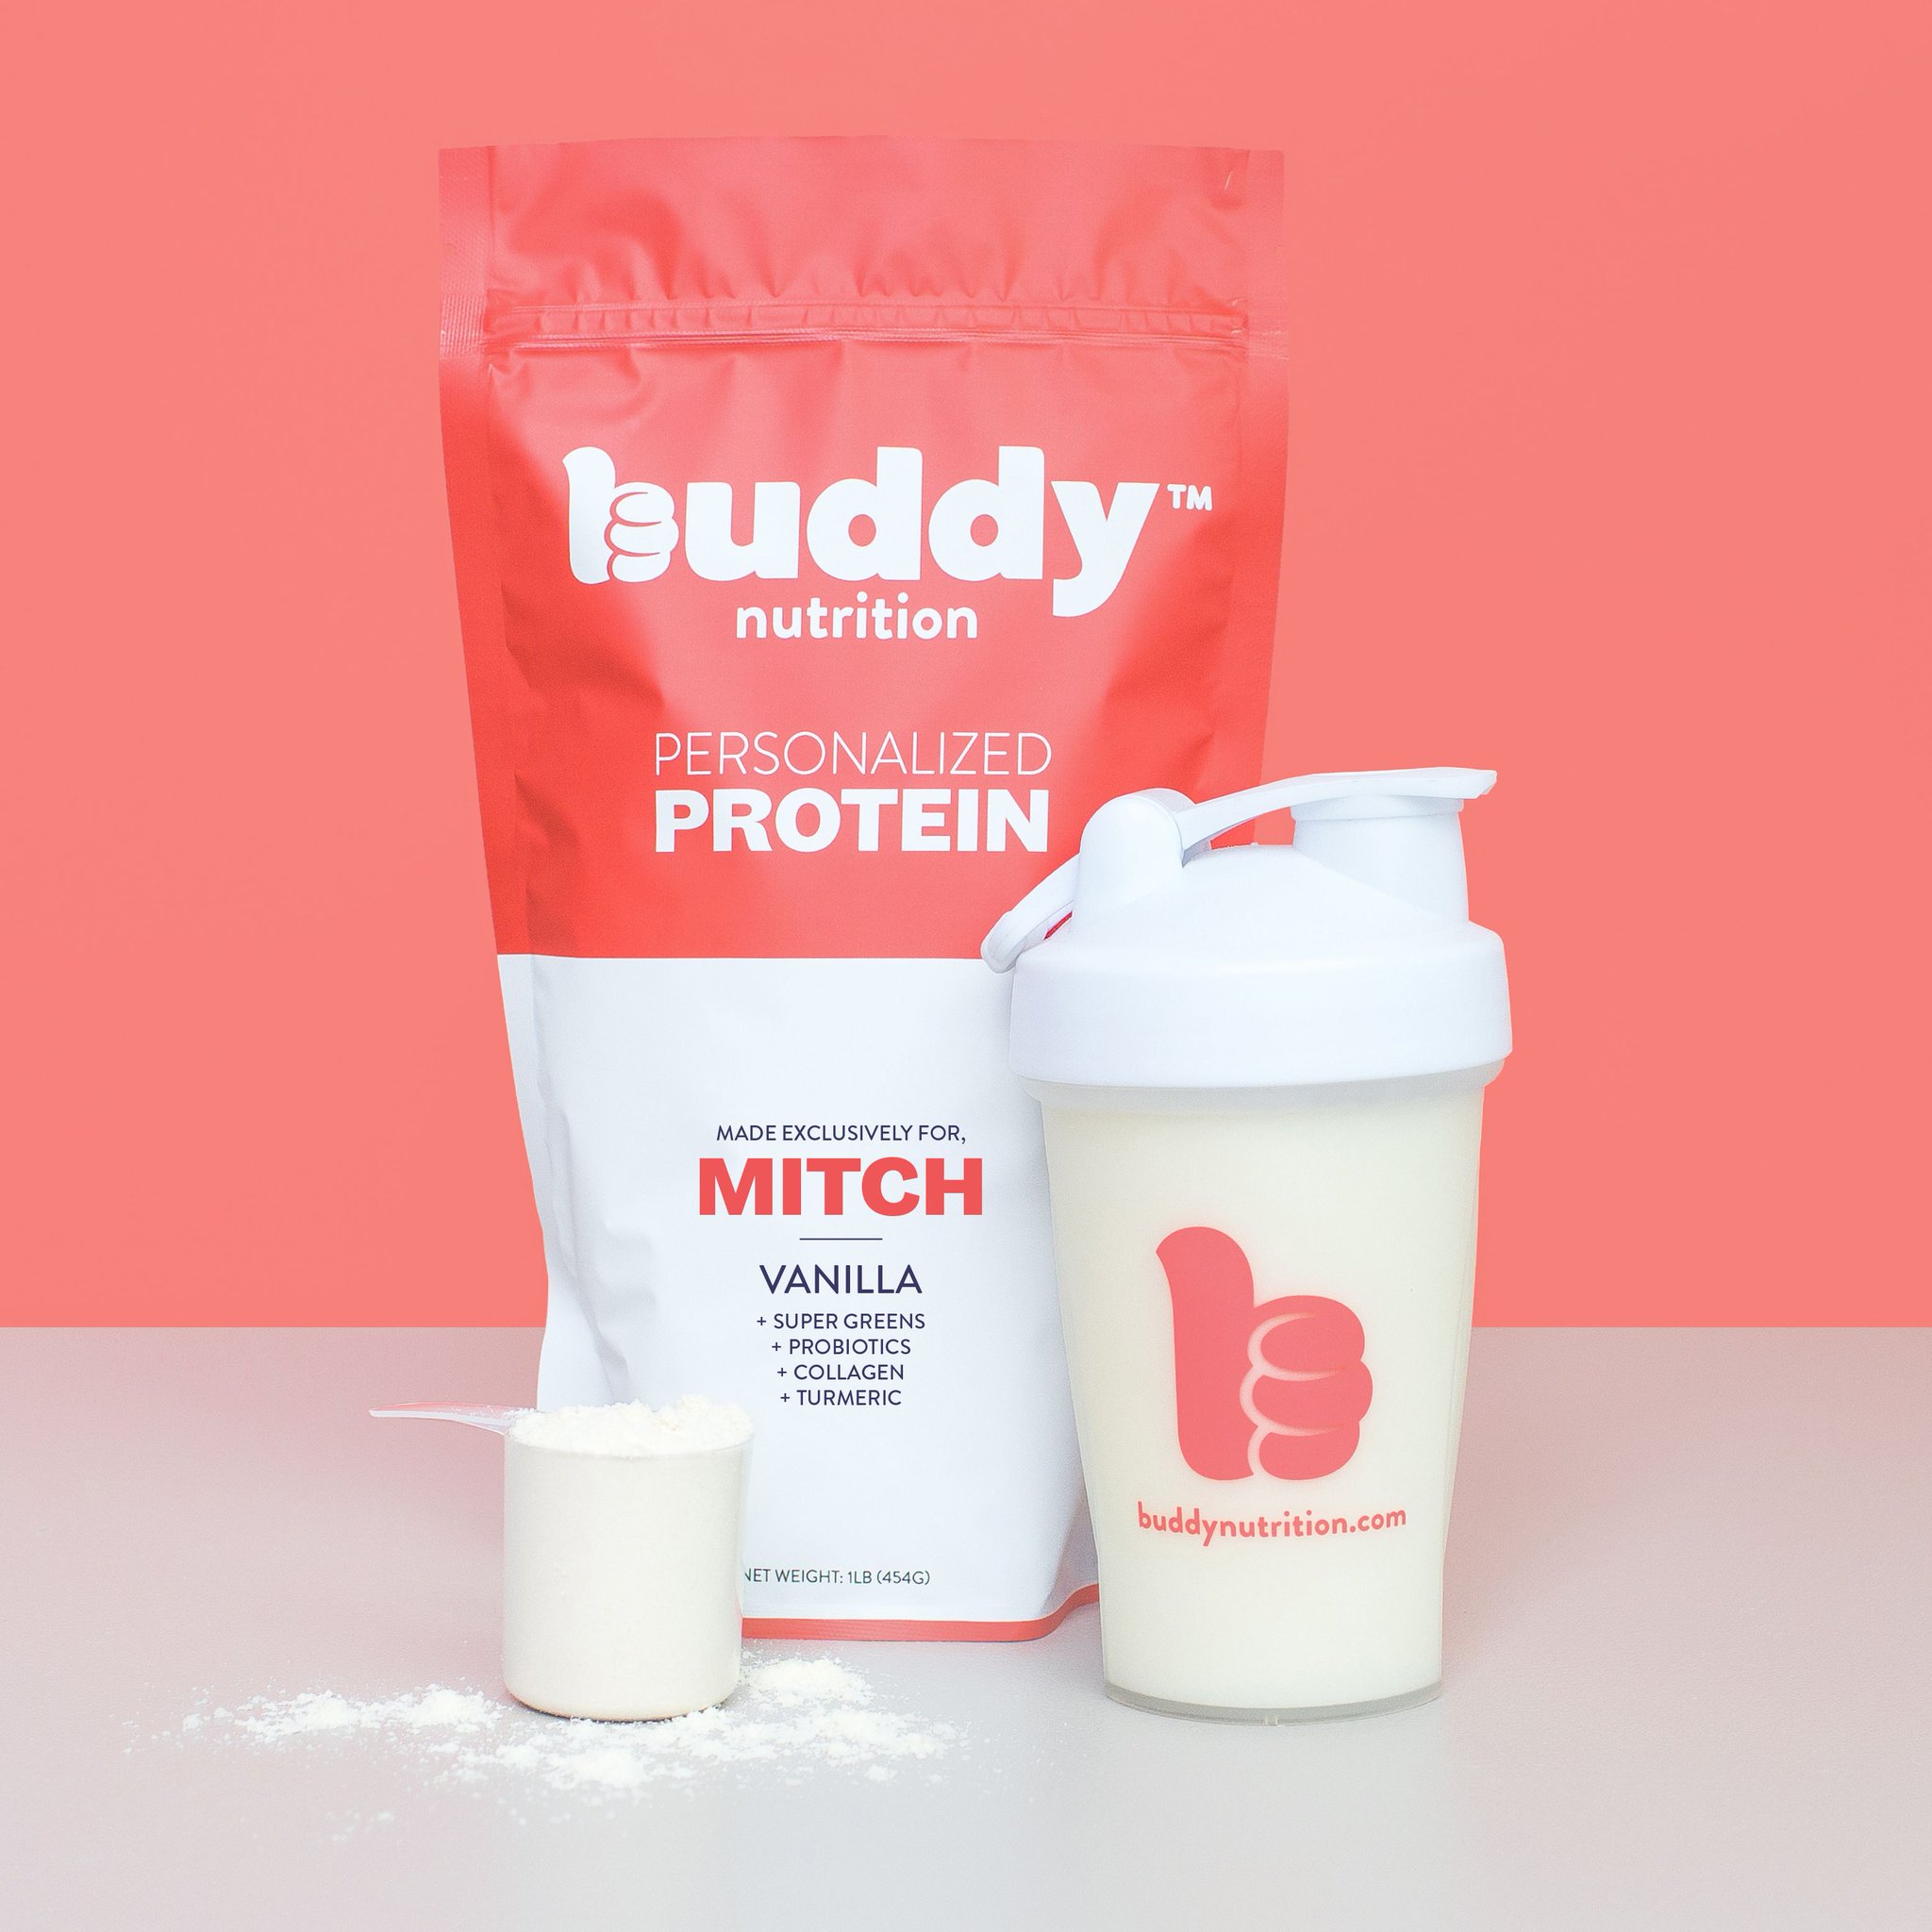 Buddy Nutrition Launches Individually-Personalized Protein Powders | NOSH